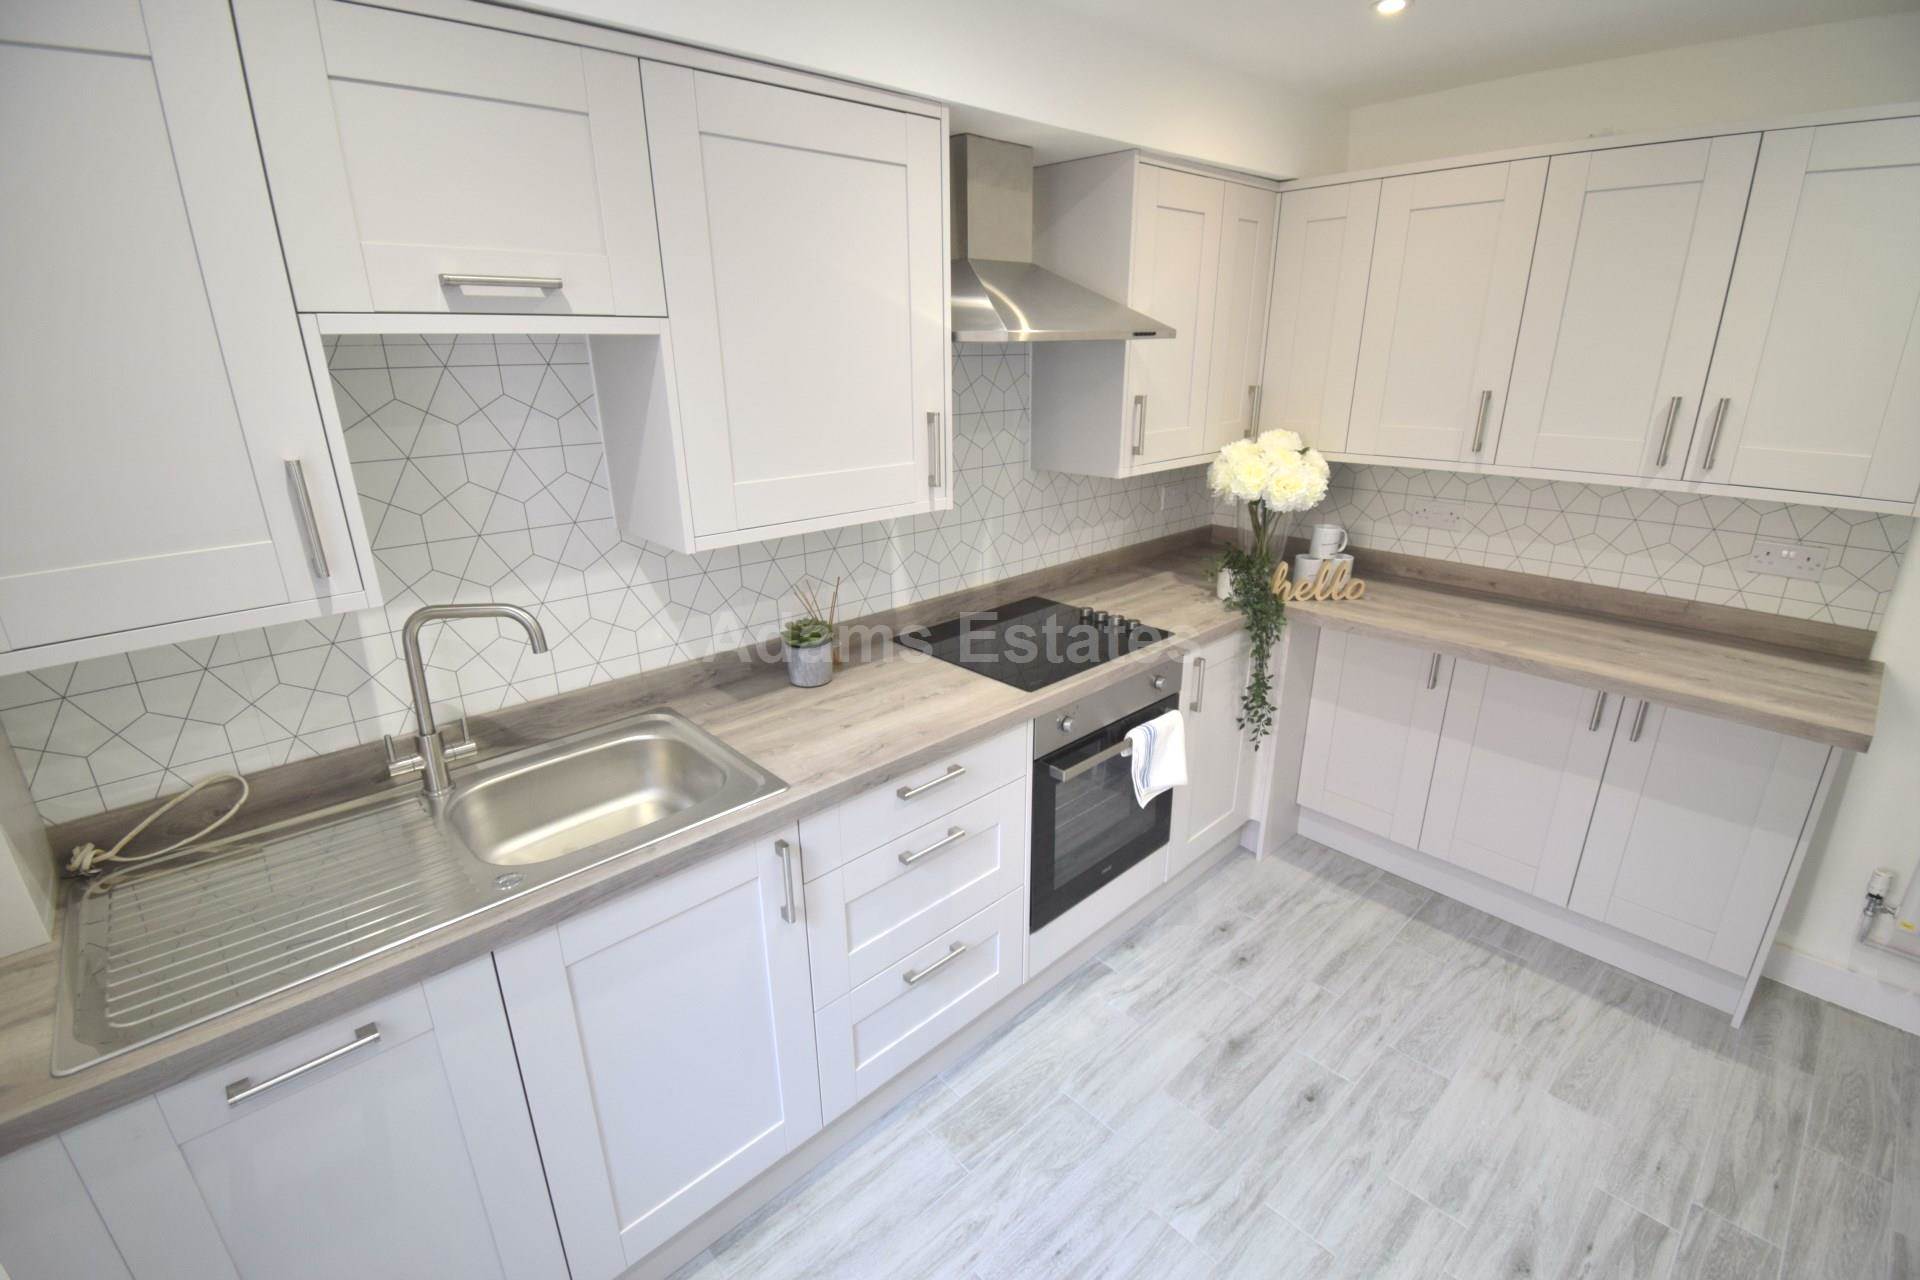 5 bed Mid Terraced House for rent in Reading. From Student Holmes - University Office